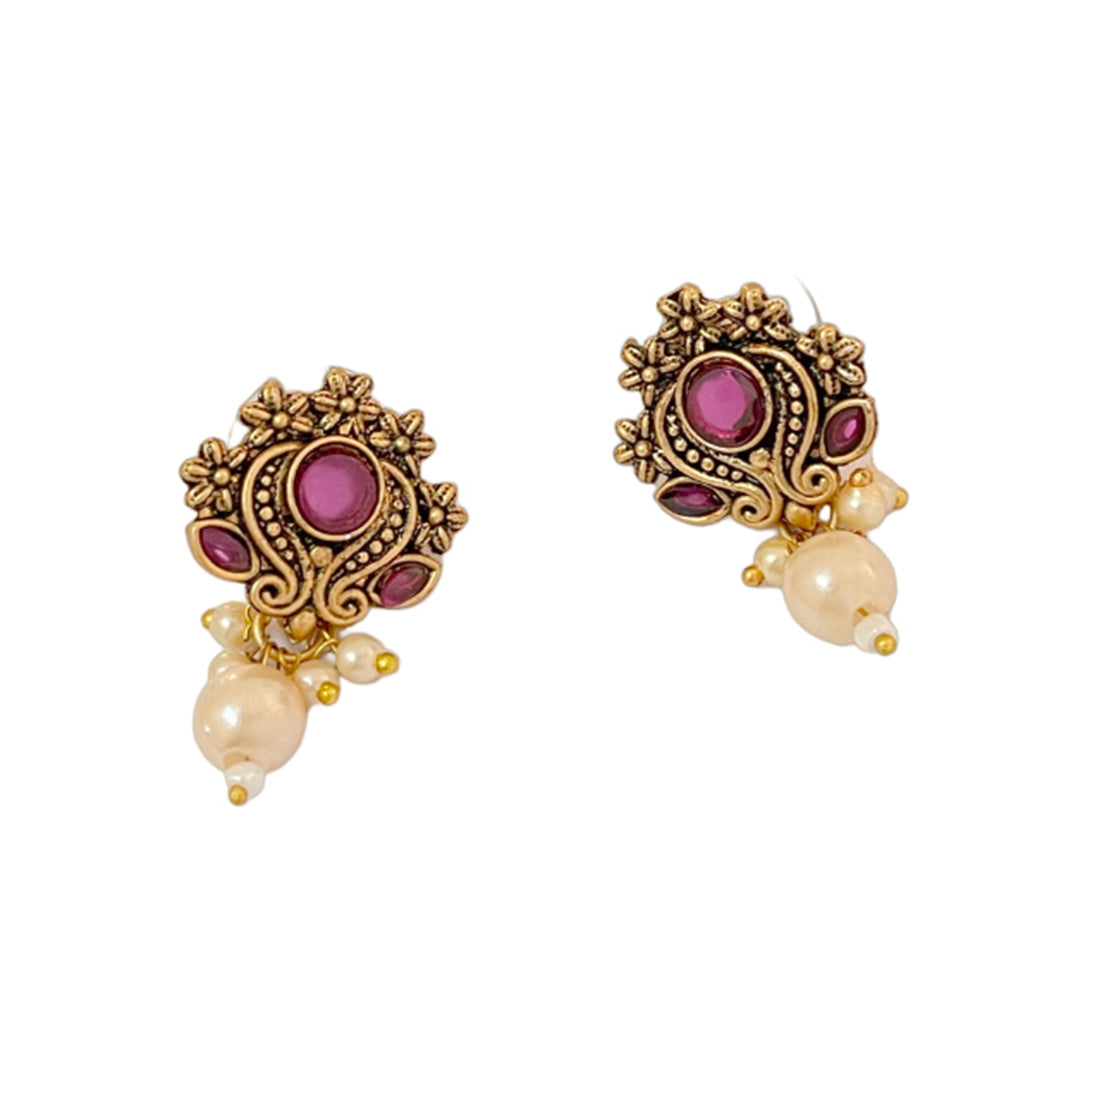 Ethnic Oxidized Maroon Rhinestones Gold-Toned Studs with Pearl Drop Earrings